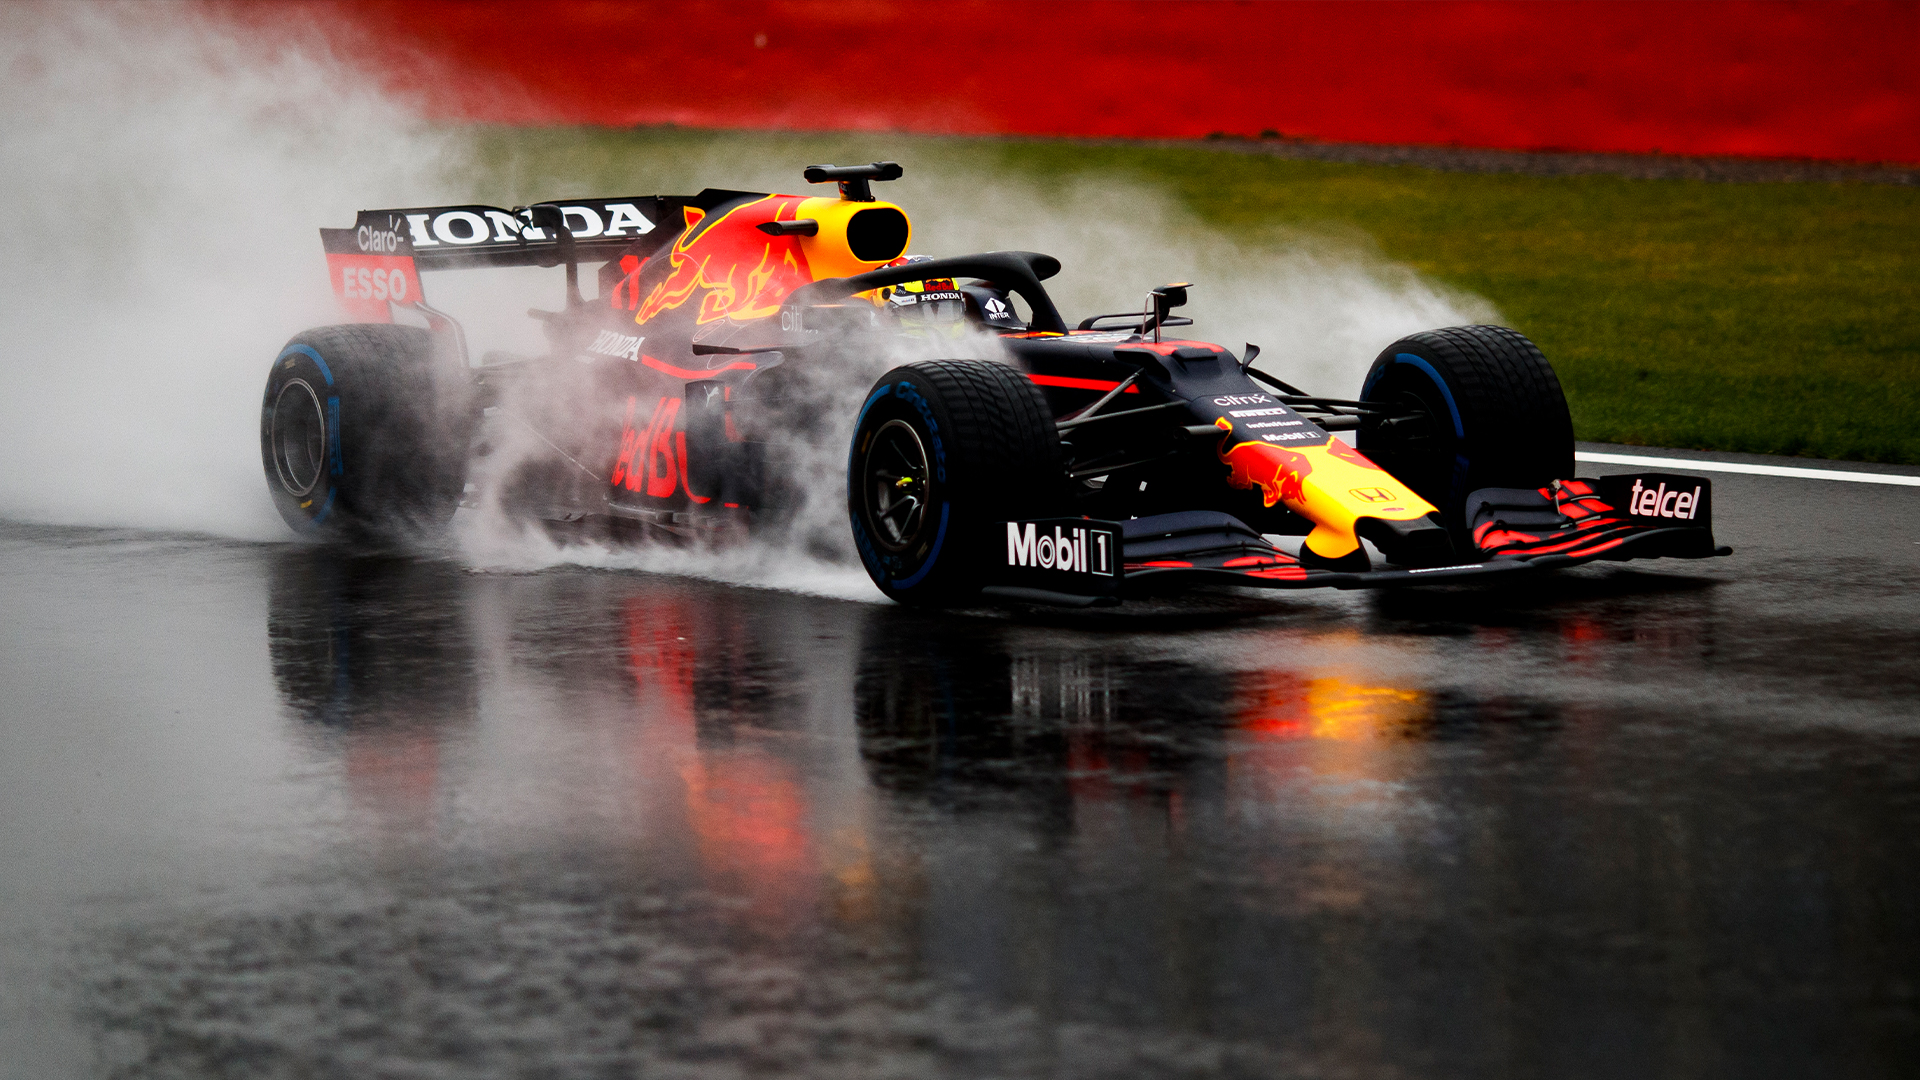 I could feel a step in overall grip and top speed.” Sergio Perez gives a review after test driving the RB16B